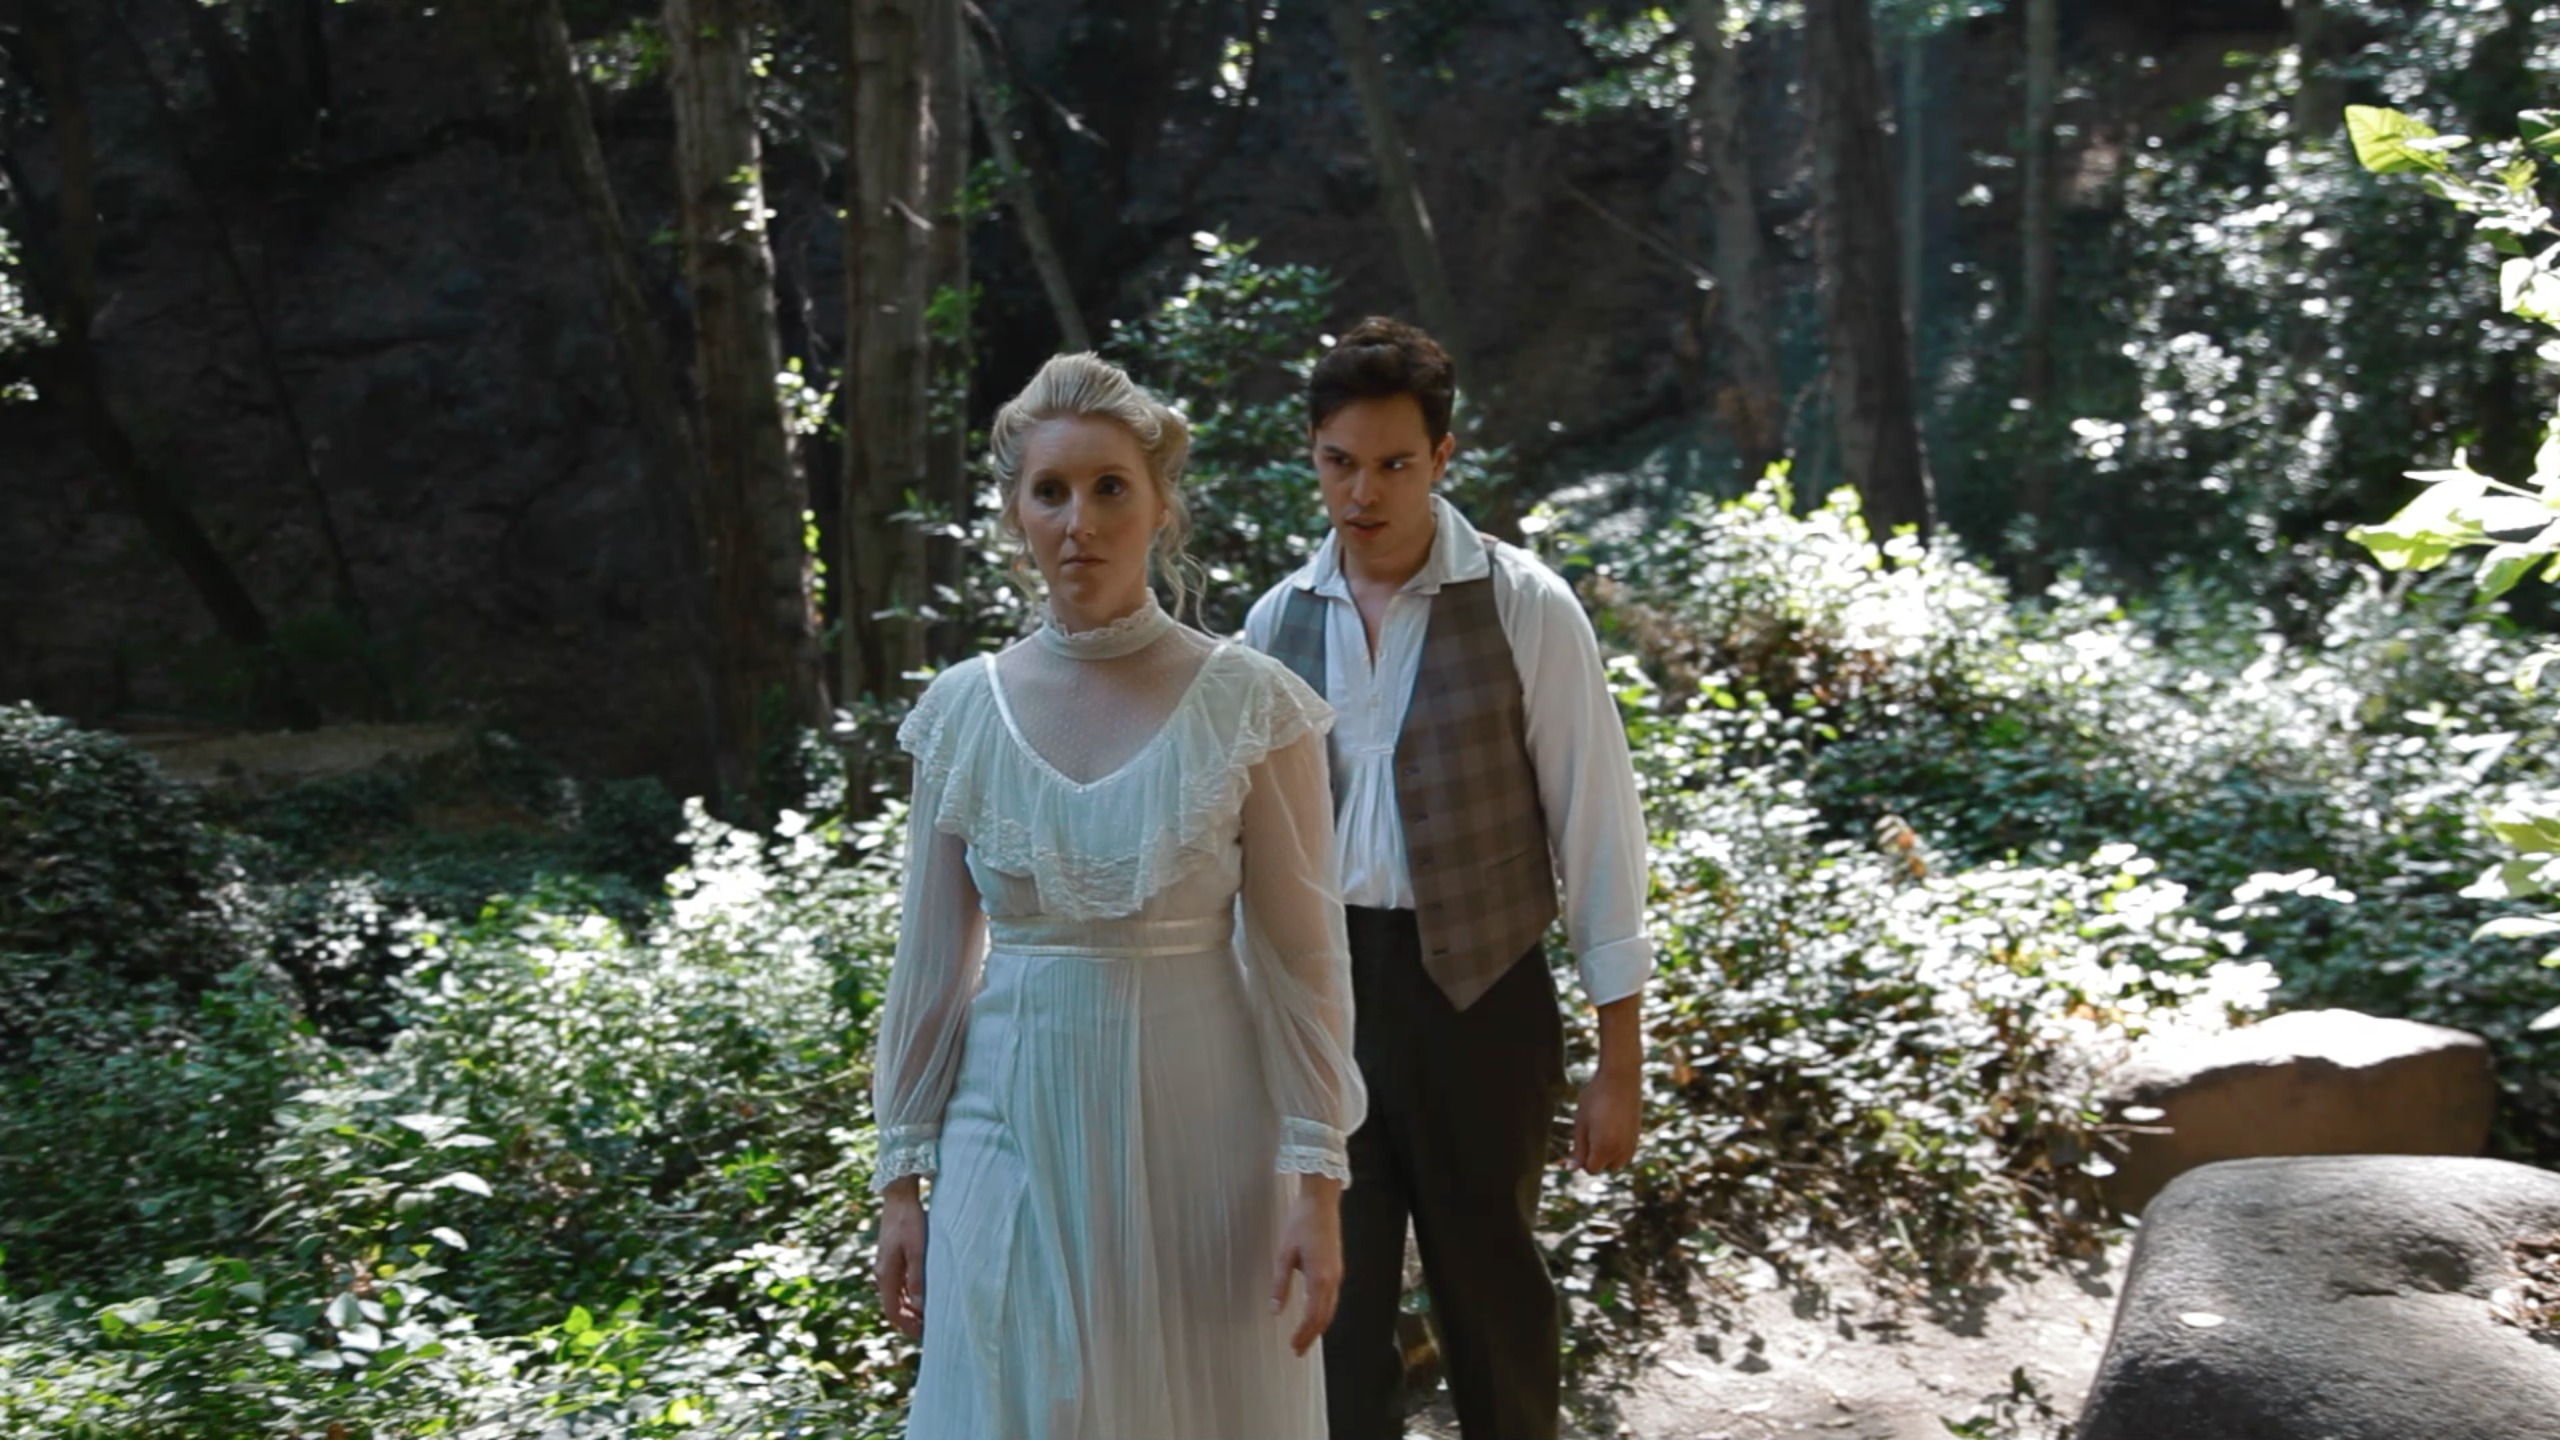 Lindsay Lucas-Bartlett and Cain Maloni in The Last Descendant.